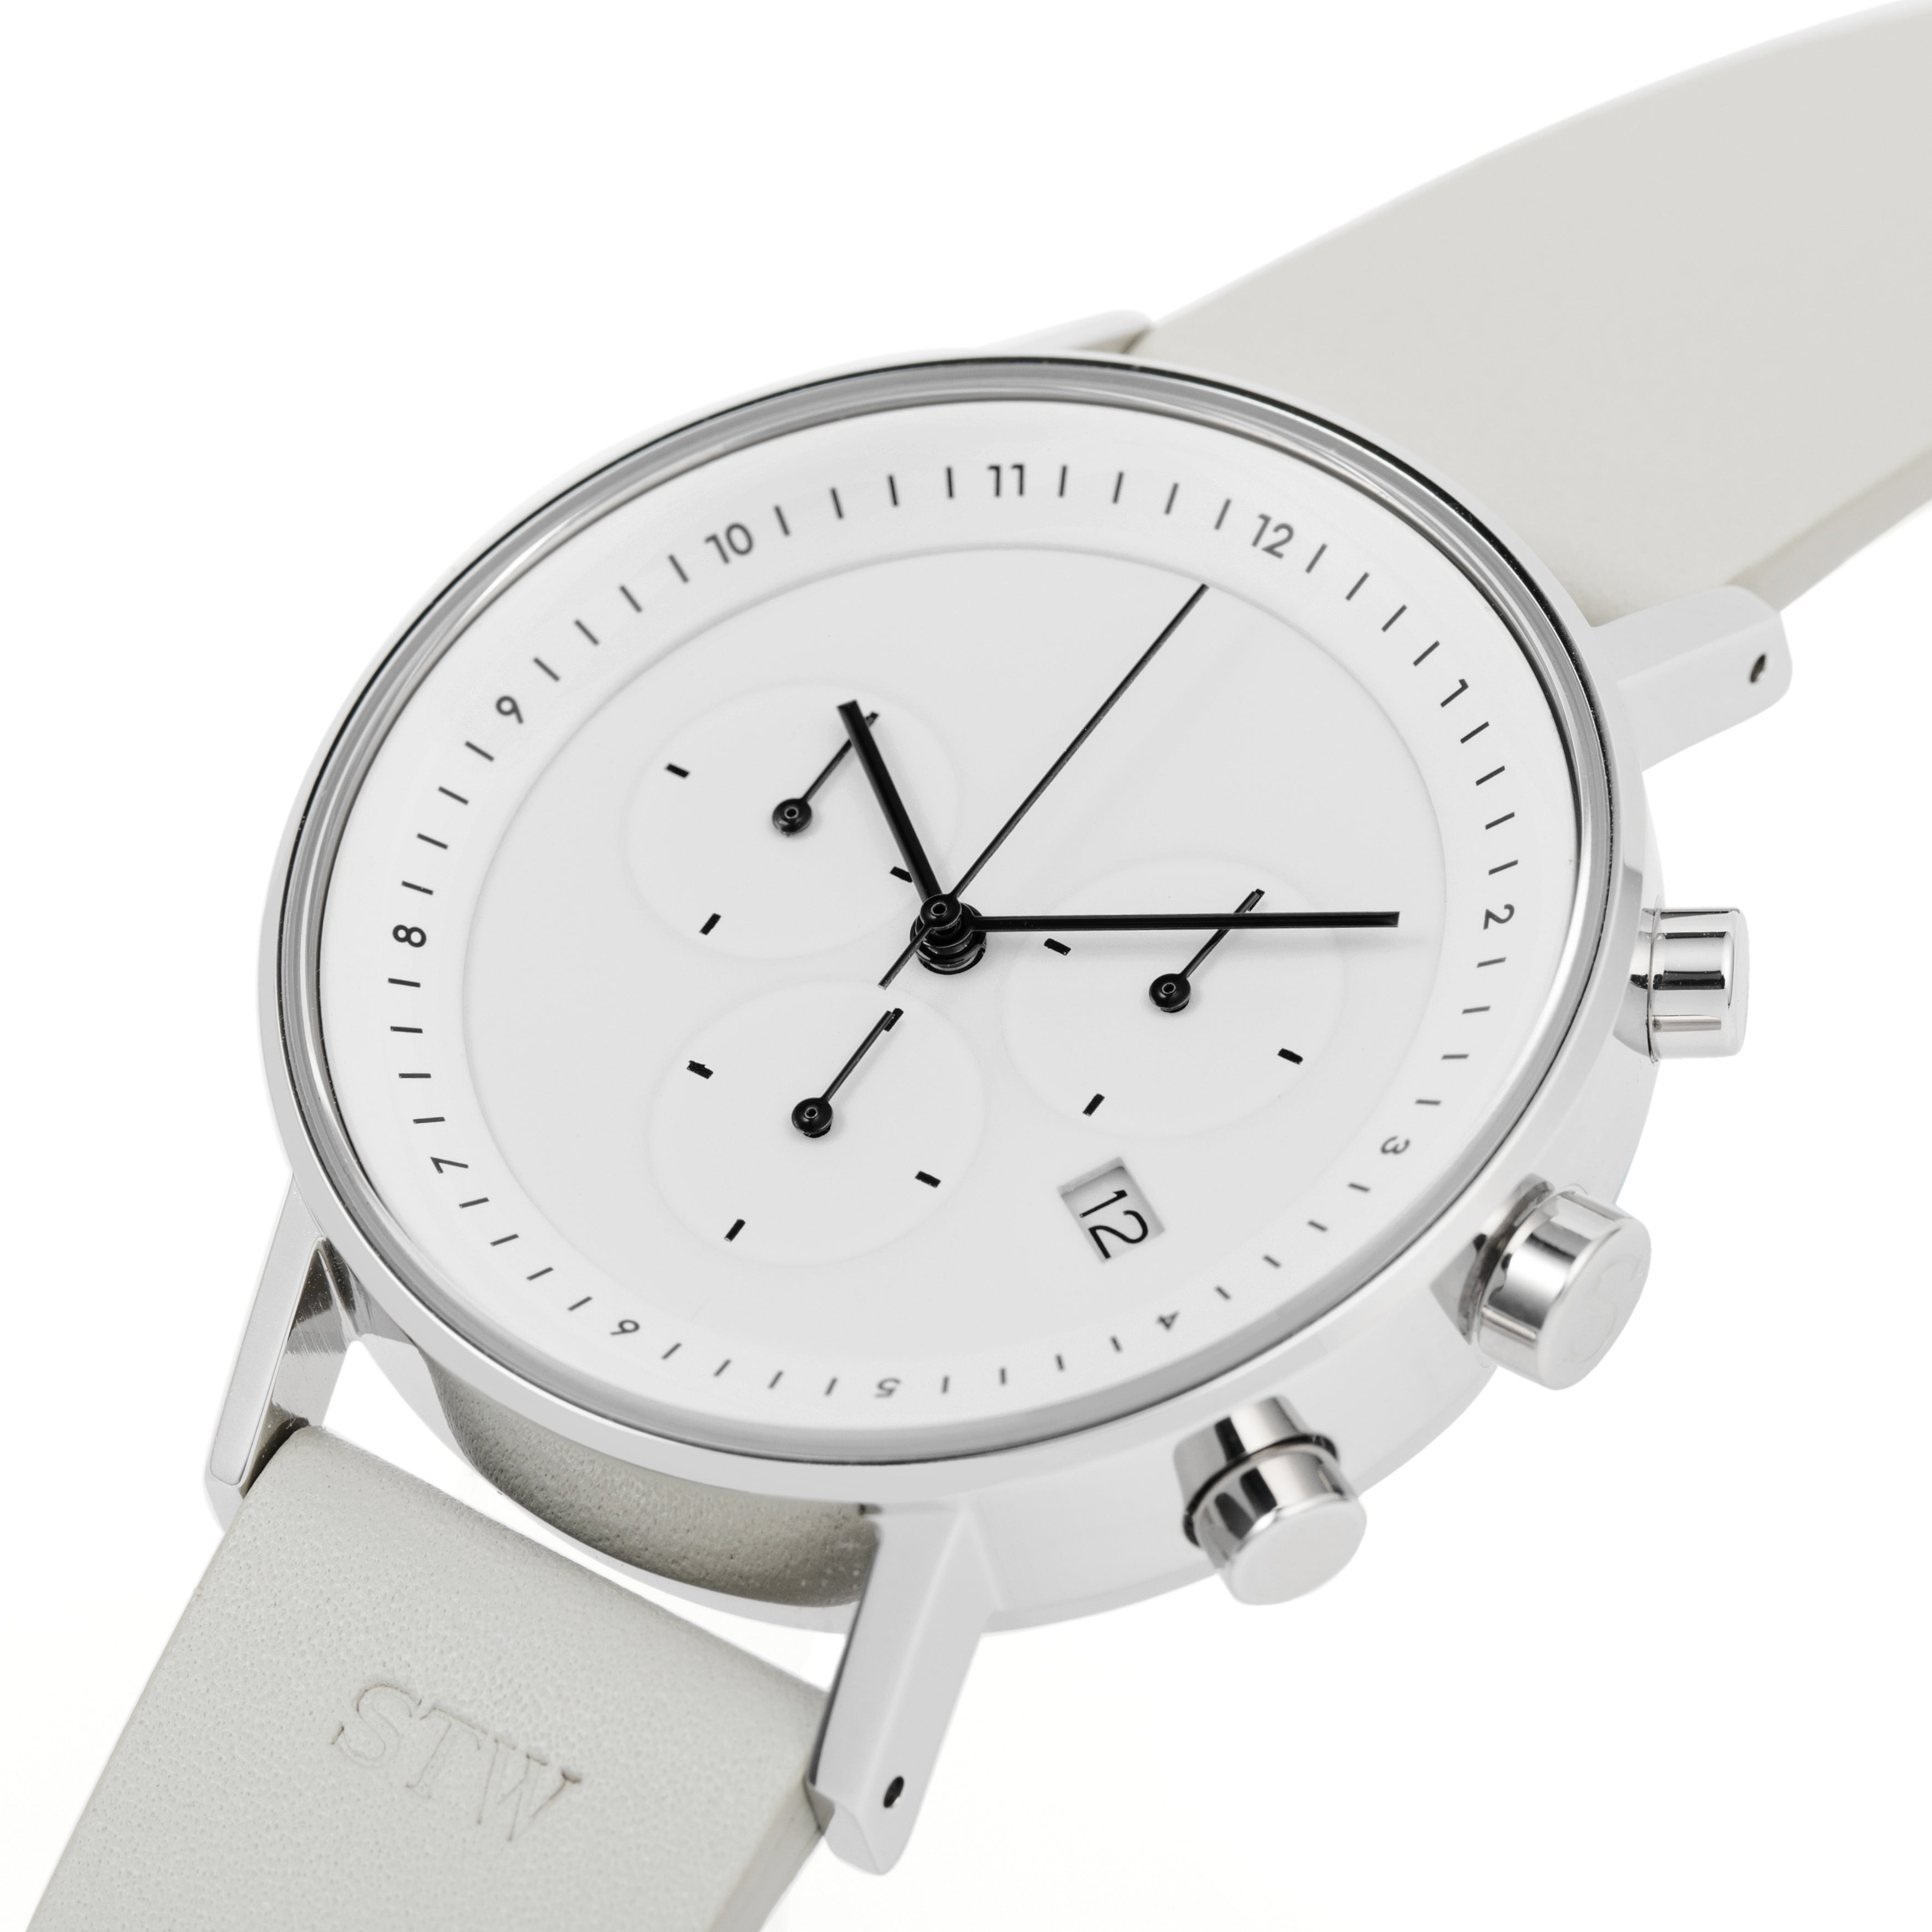 THE CHRONO - WHITE DIAL WITH GREY LEATHER STRAP WATCH